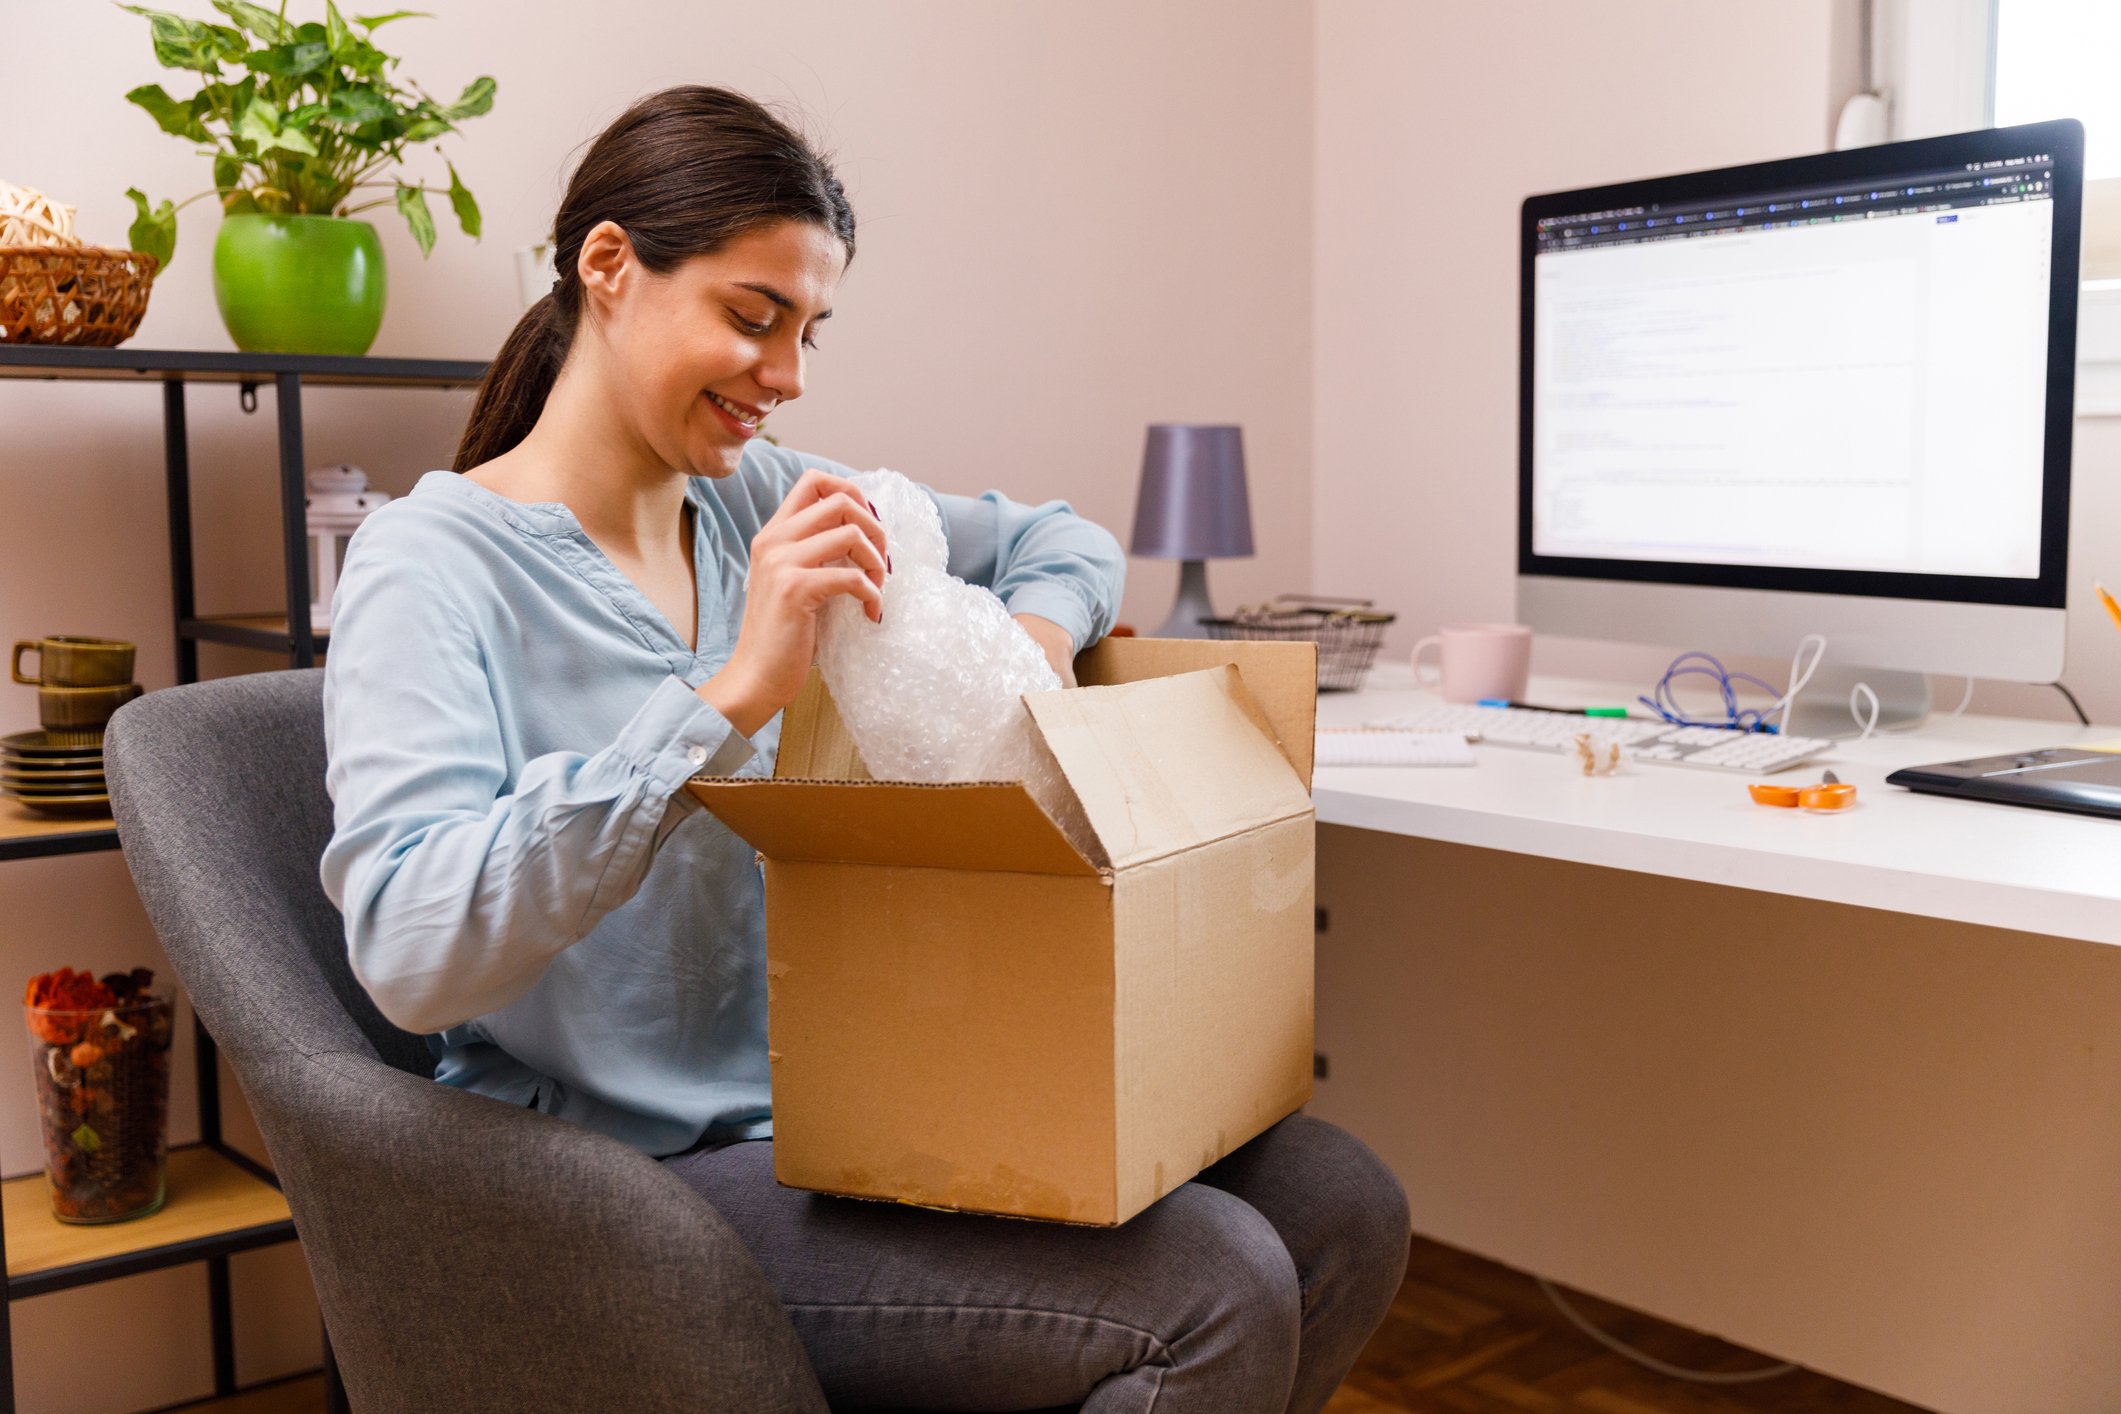 Smiling woman at desk with box on lap